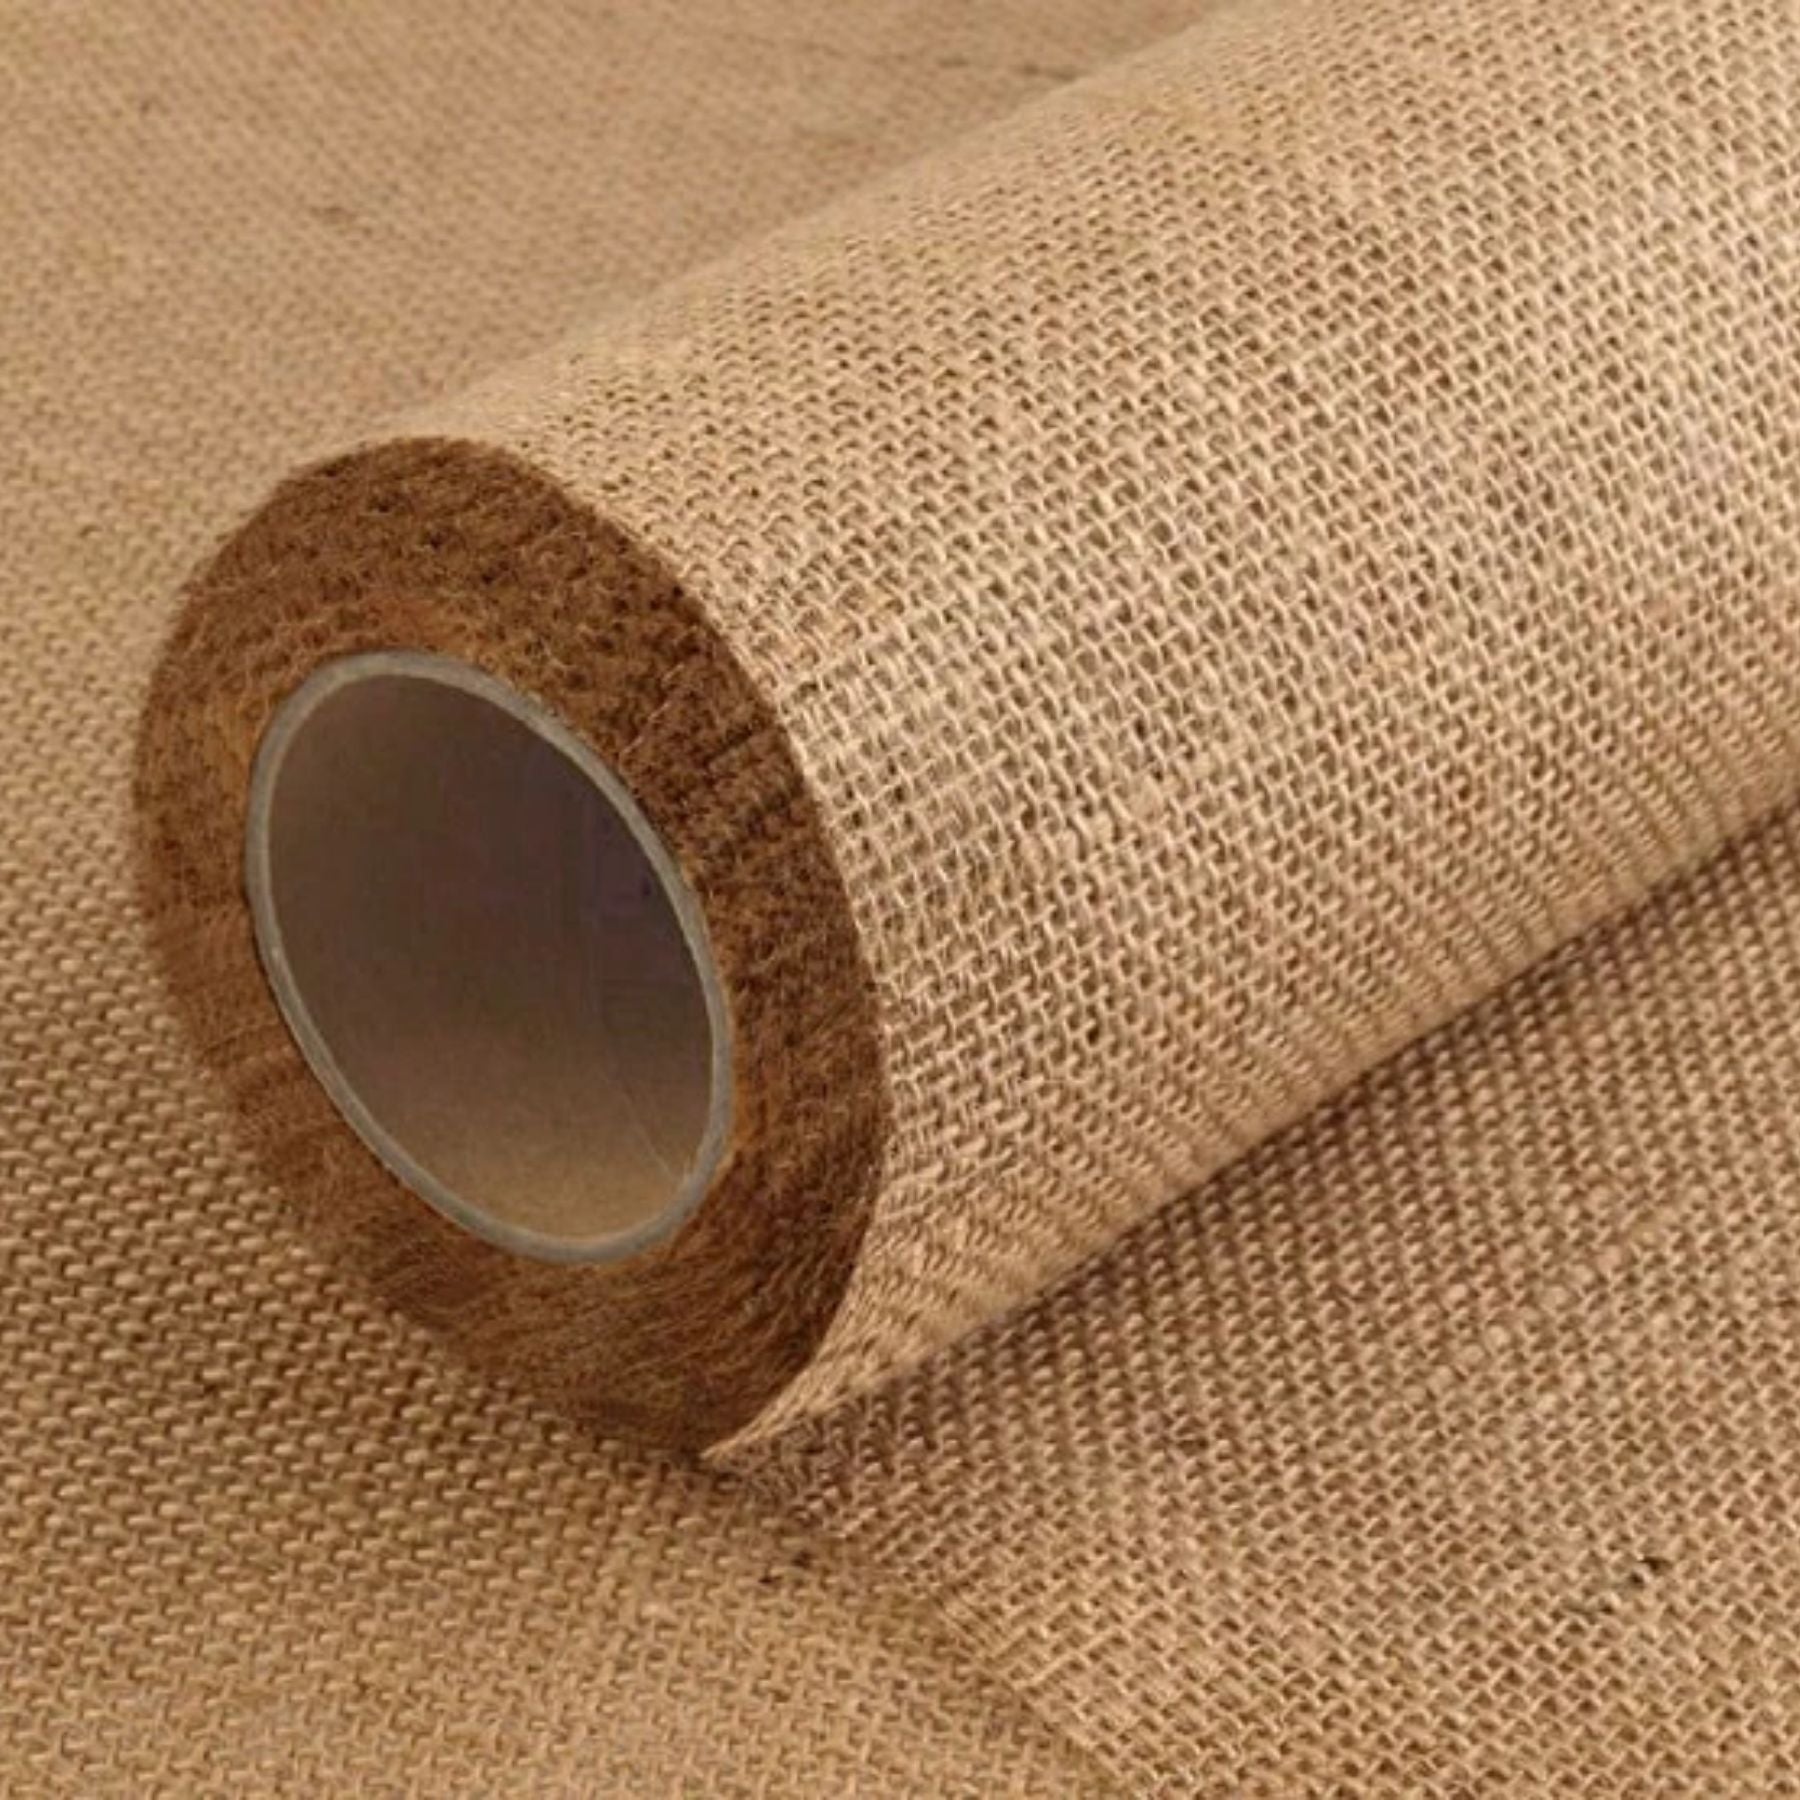 jute fabric produces less environmental pollution than synthetic materials